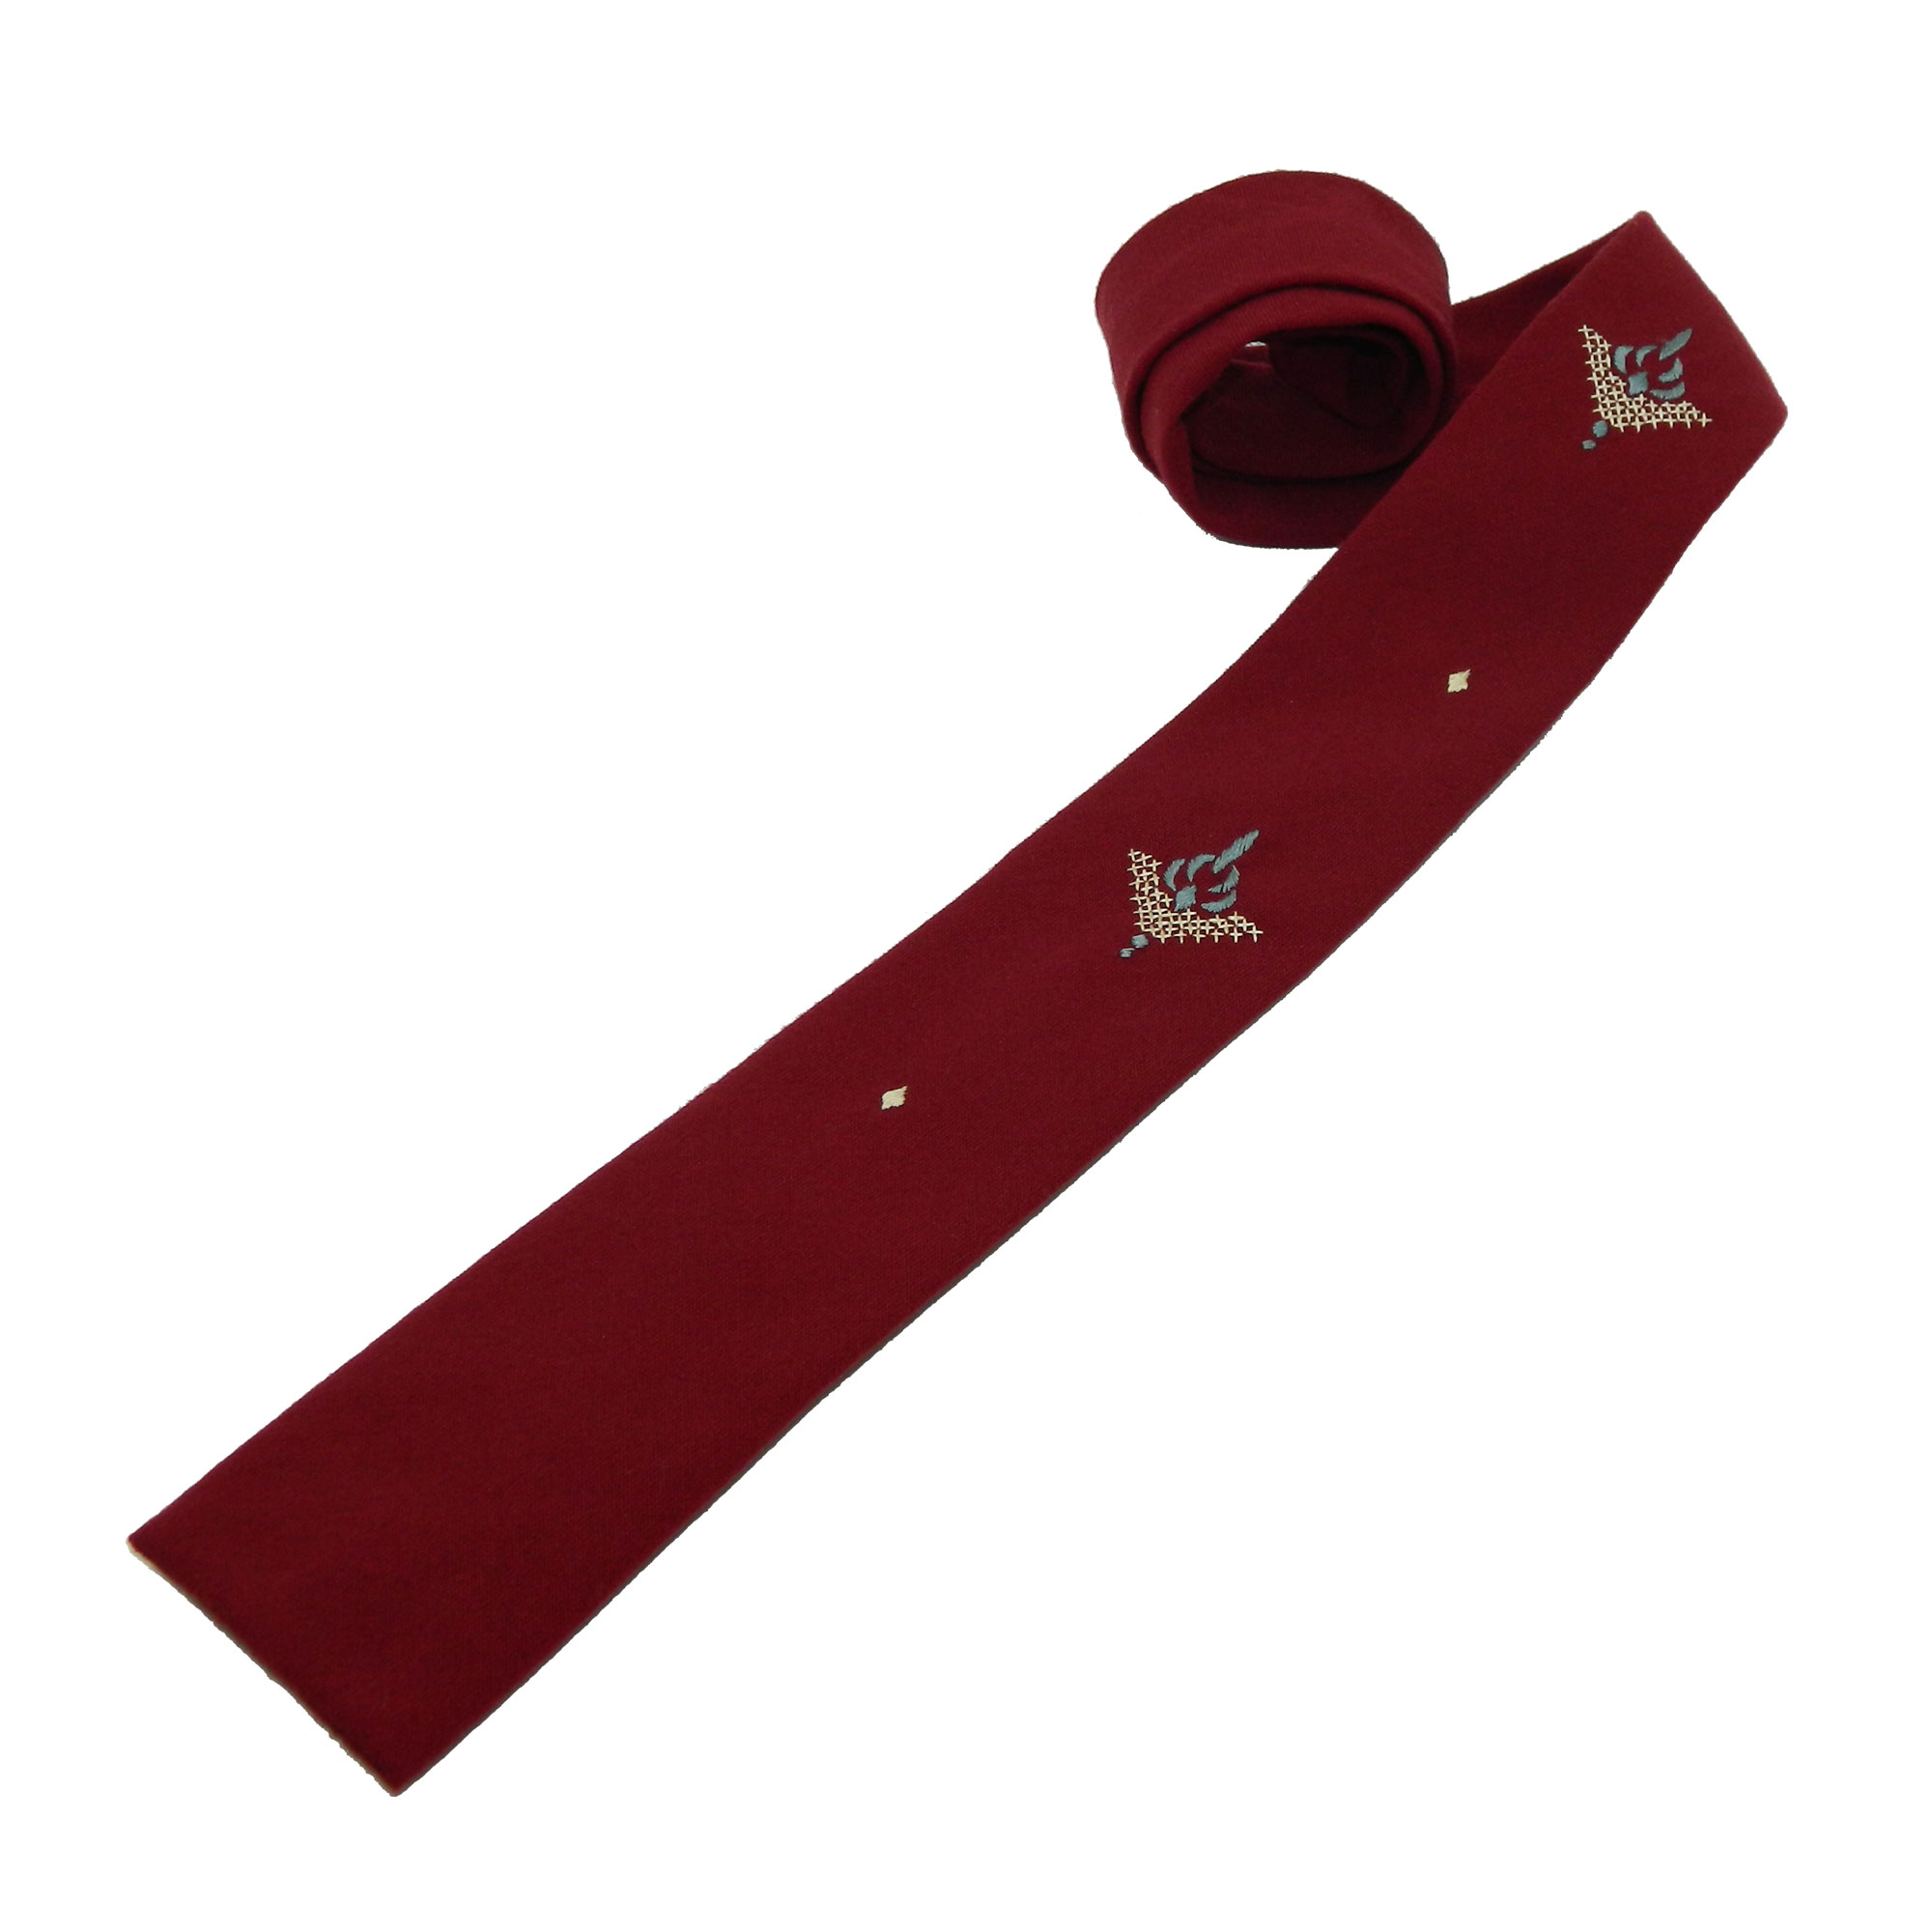 1950s embroidered square cut tie